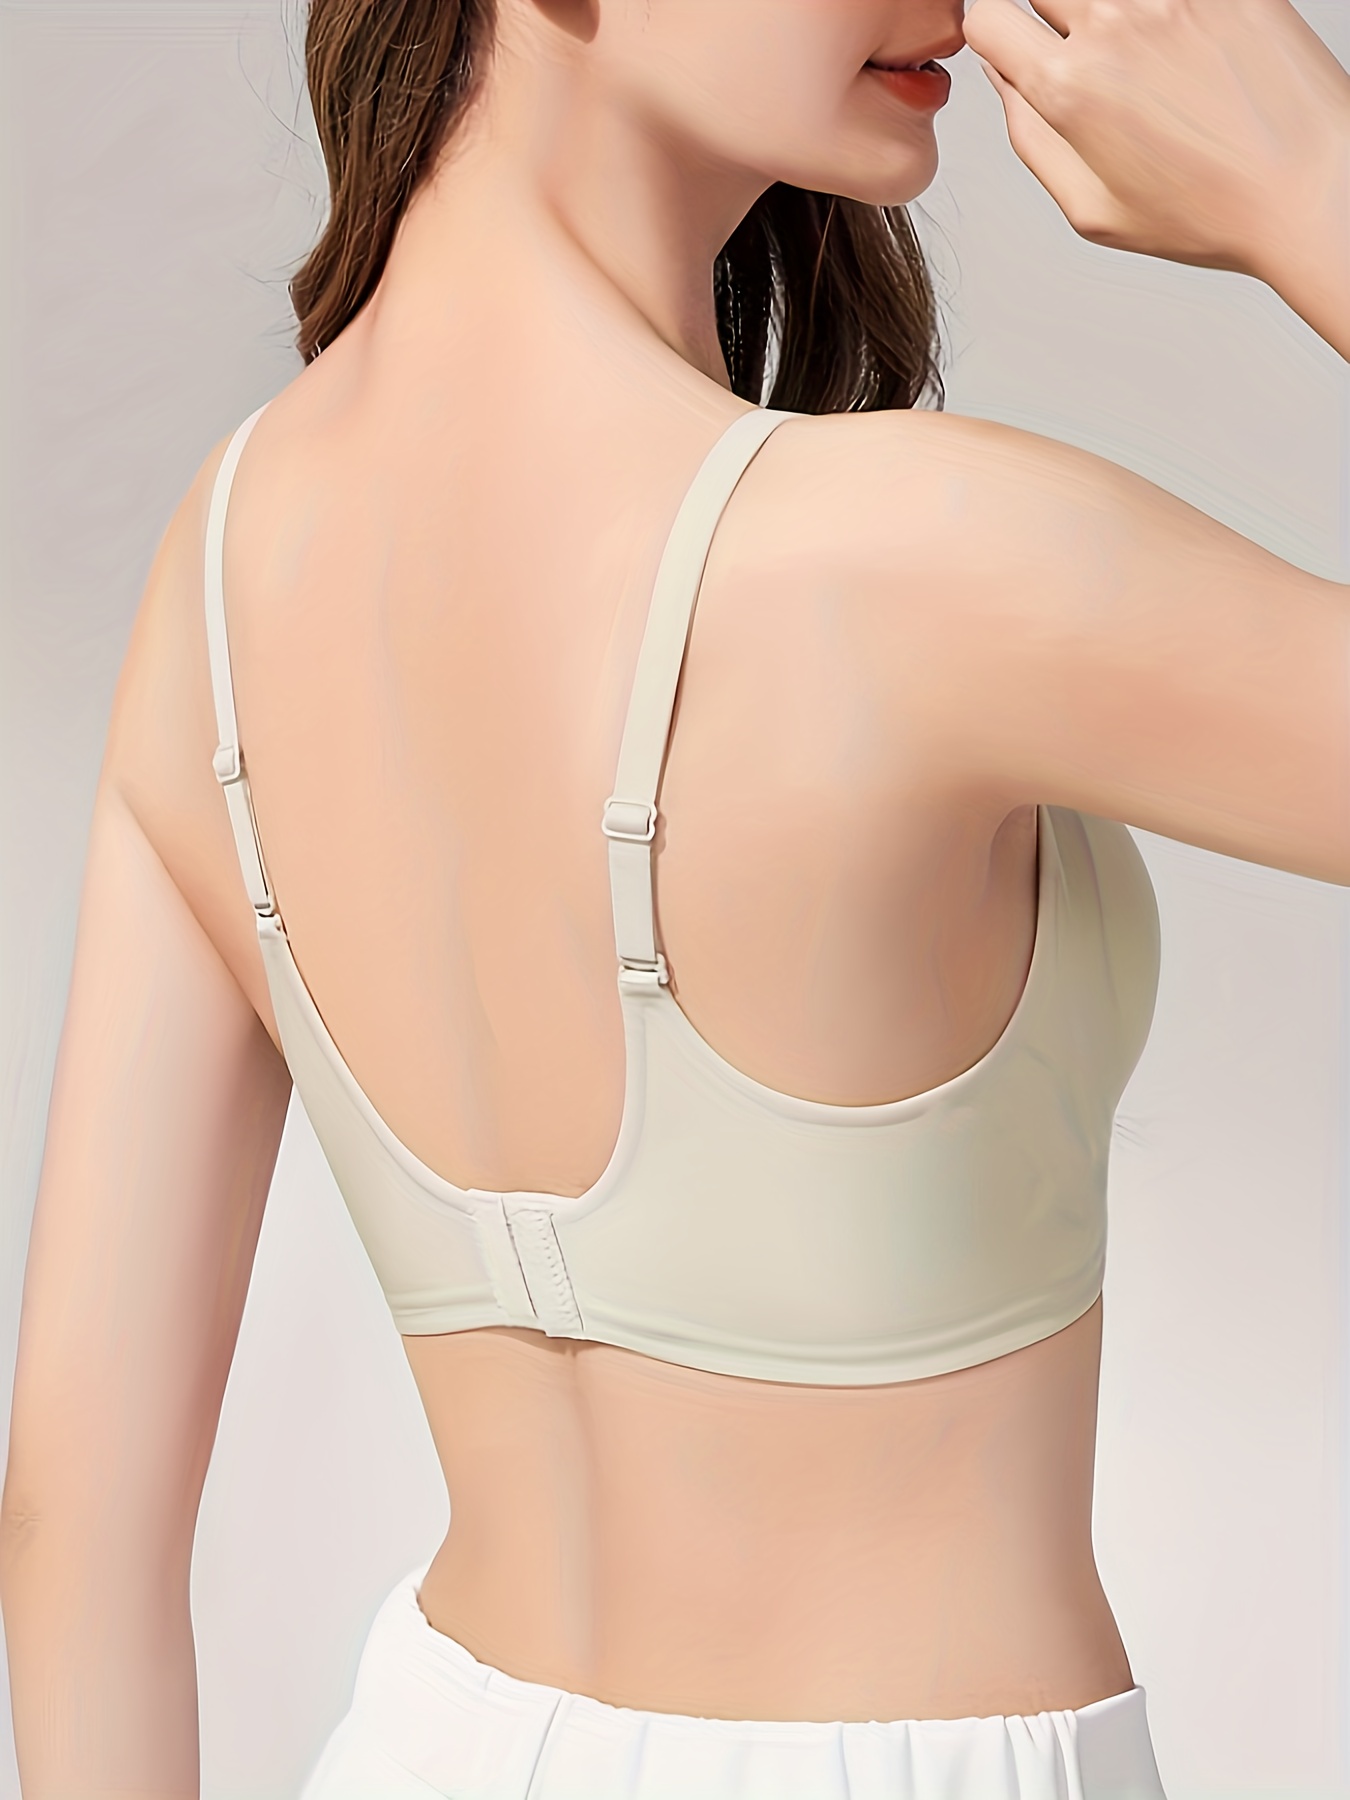 Nude Apricot Thin-strap Wireless and Seamless Bra Super-comfy and Sexy  Design Perfect for Daily Life, Home Working, Sports or Maternity. -   Canada